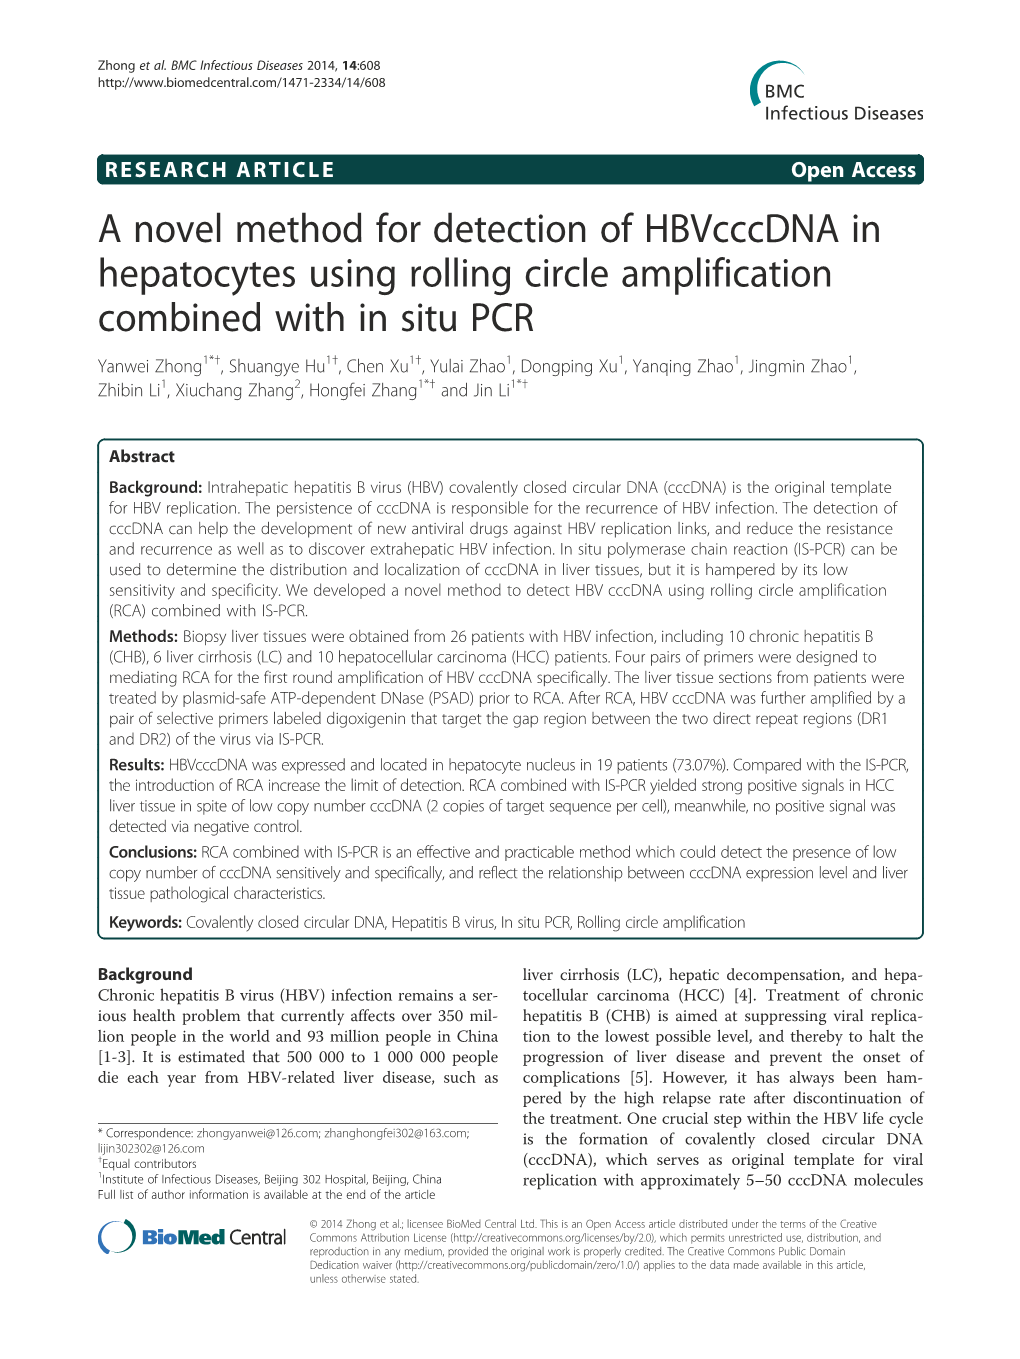 A Novel Method for Detection of Hbvcccdna in Hepatocytes Using